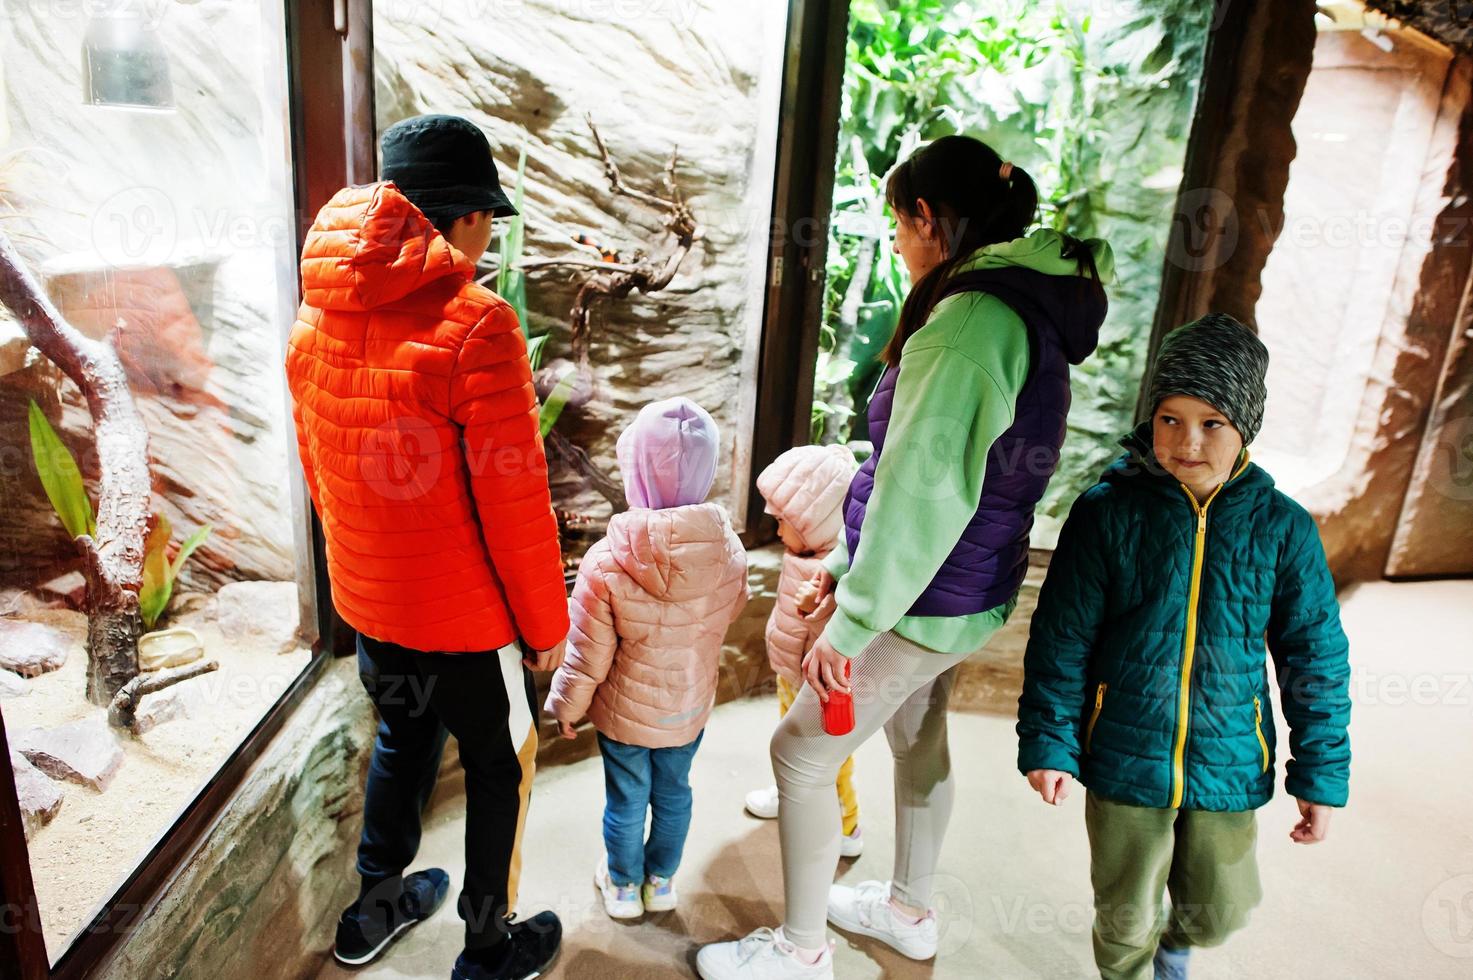 Mother with four kids discovering and watching animals at zoo. photo